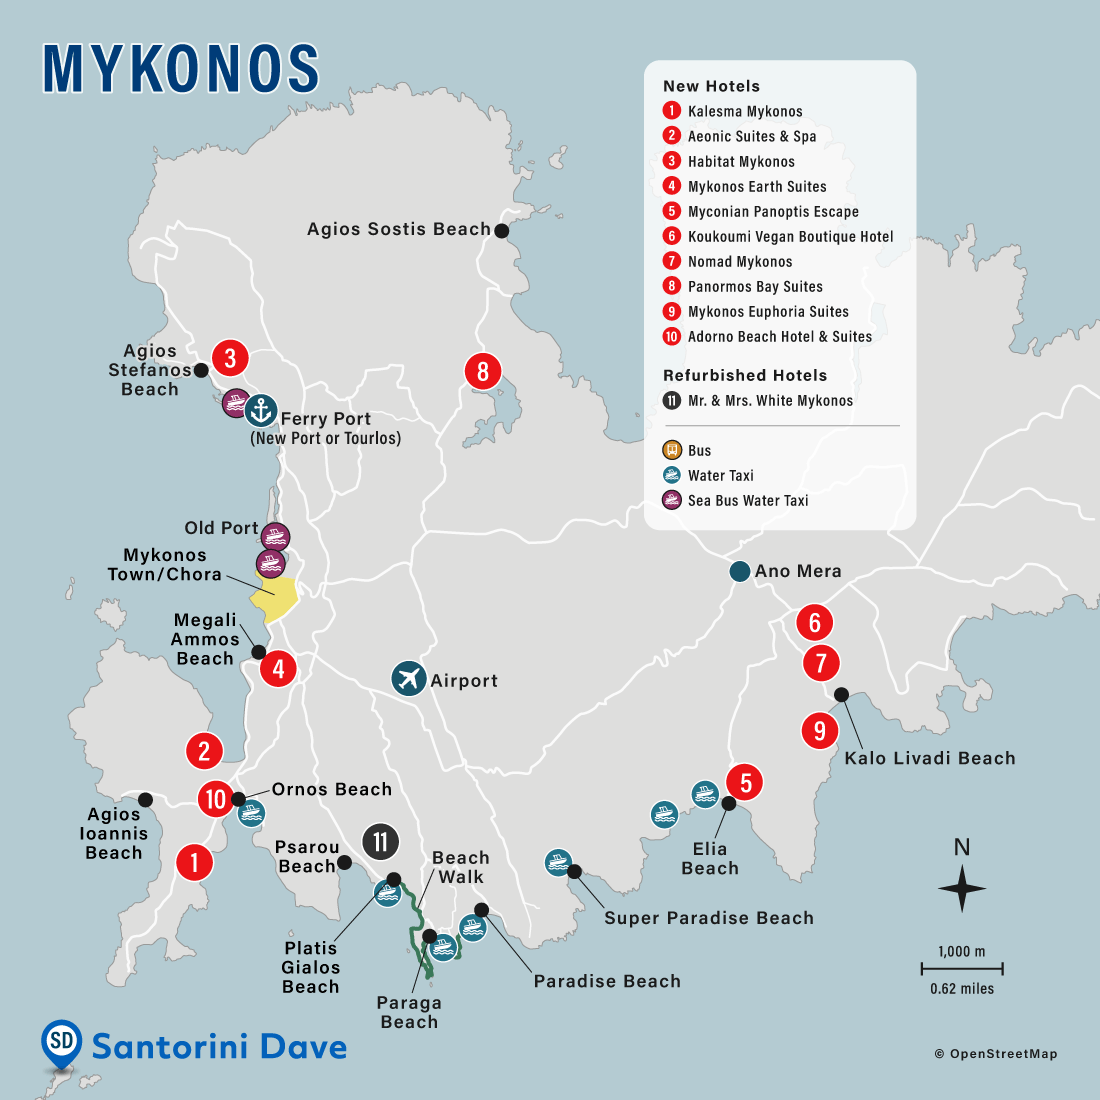 Map showing the locations of the 11 best new hotels in Mykonos, Greece